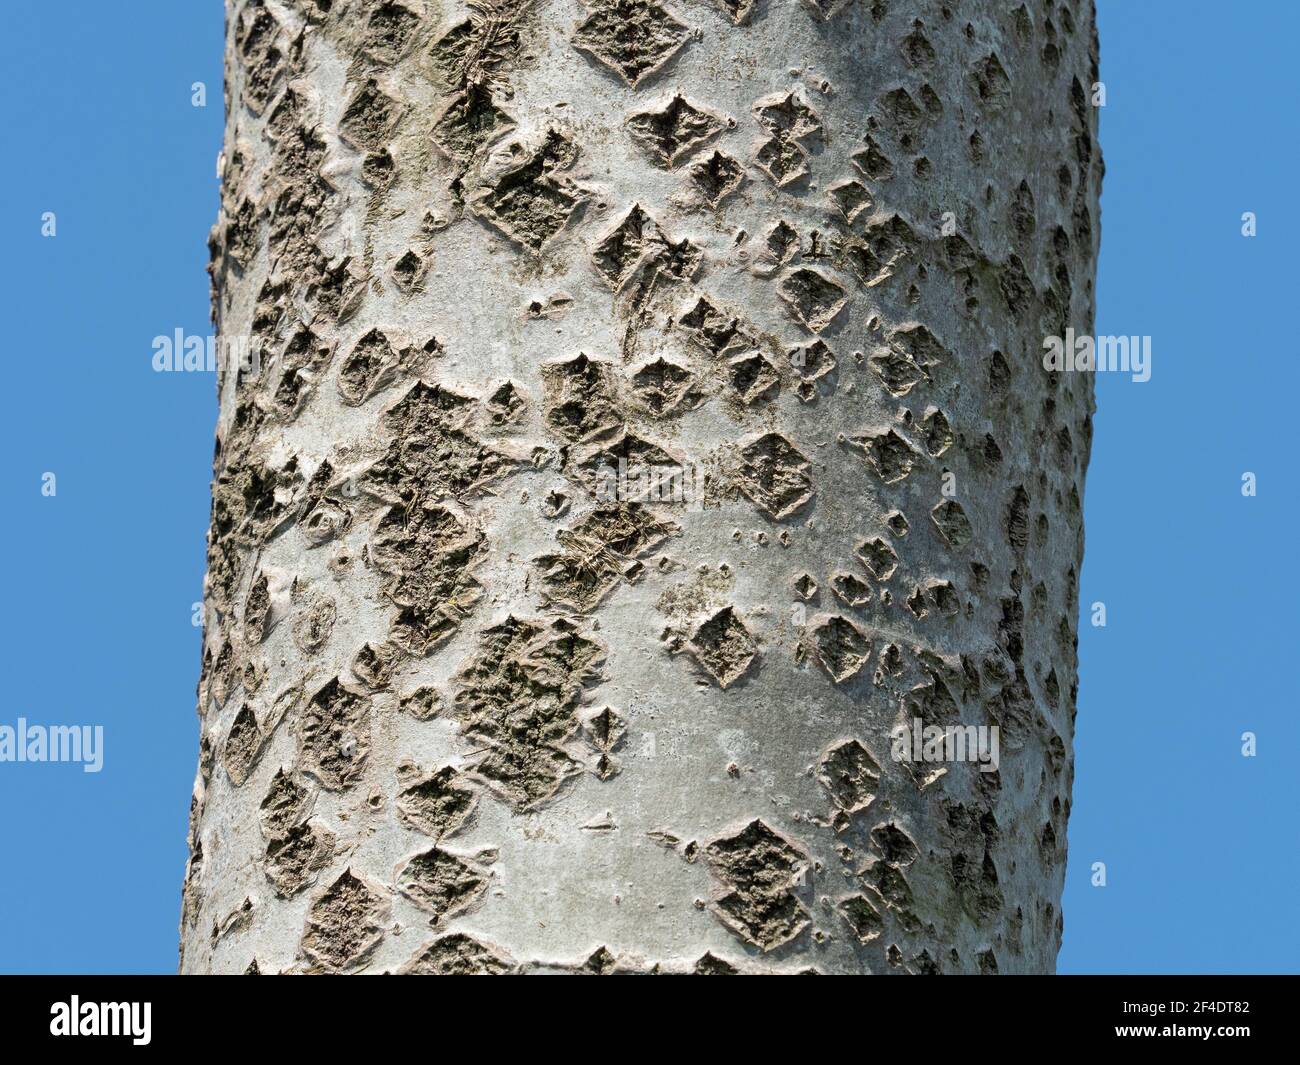 Trunk of White Poplar tree showing lenticels on the bark. Stock Photo